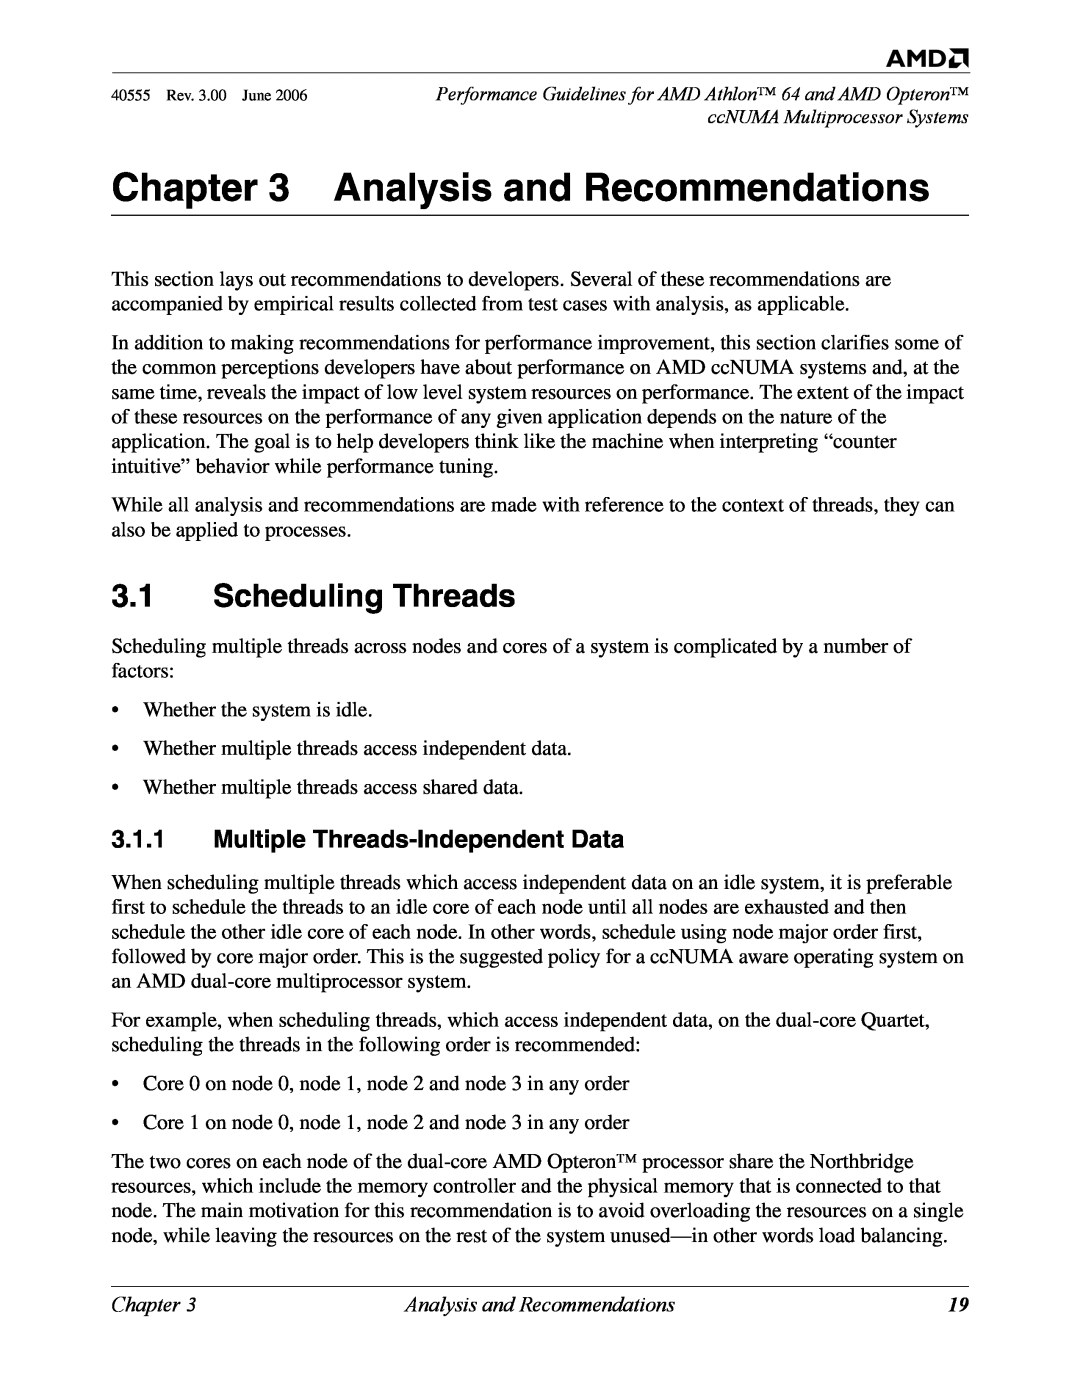 AMD 64 manual Analysis and Recommendations, Scheduling Threads, Multiple Threads-Independent Data, Chapter 